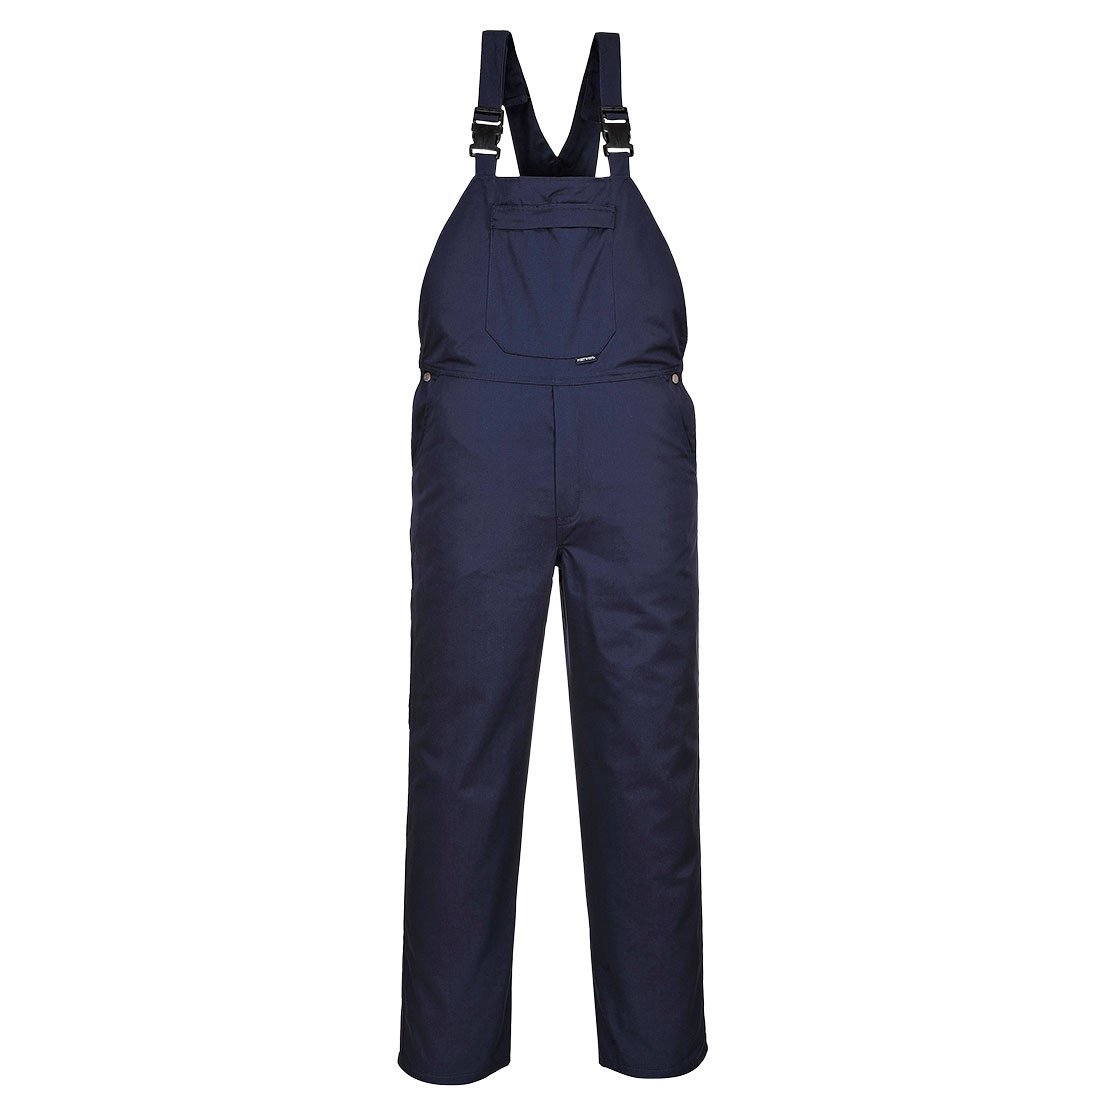 Womens Portwest Bib and Brace Overall Navy